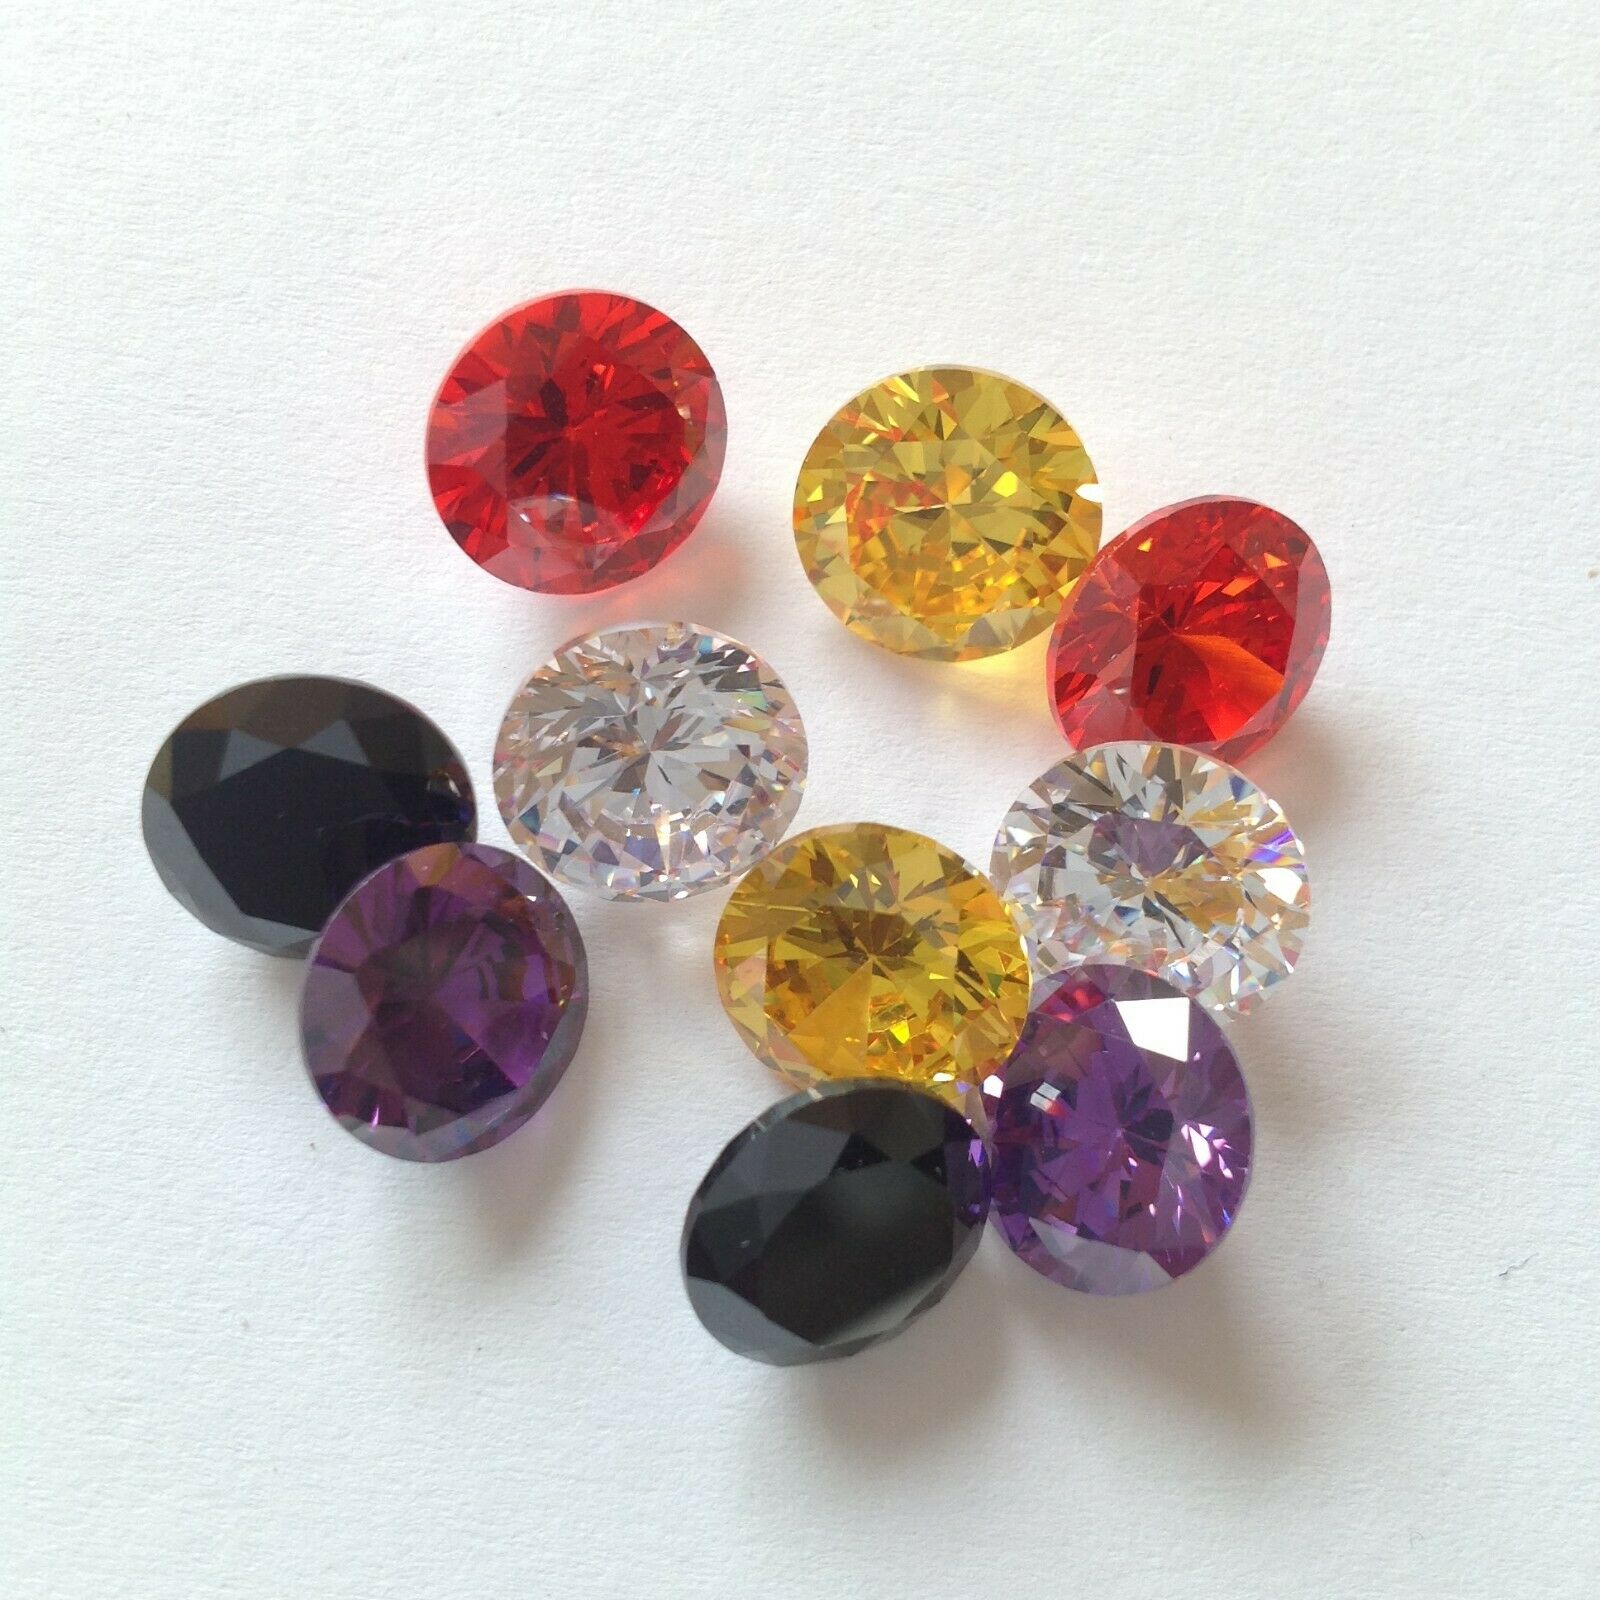 Cubic Zirconia Aaa Loose Mixed Lot 2-10mm All Color Round Cz Gems - Usa Seller